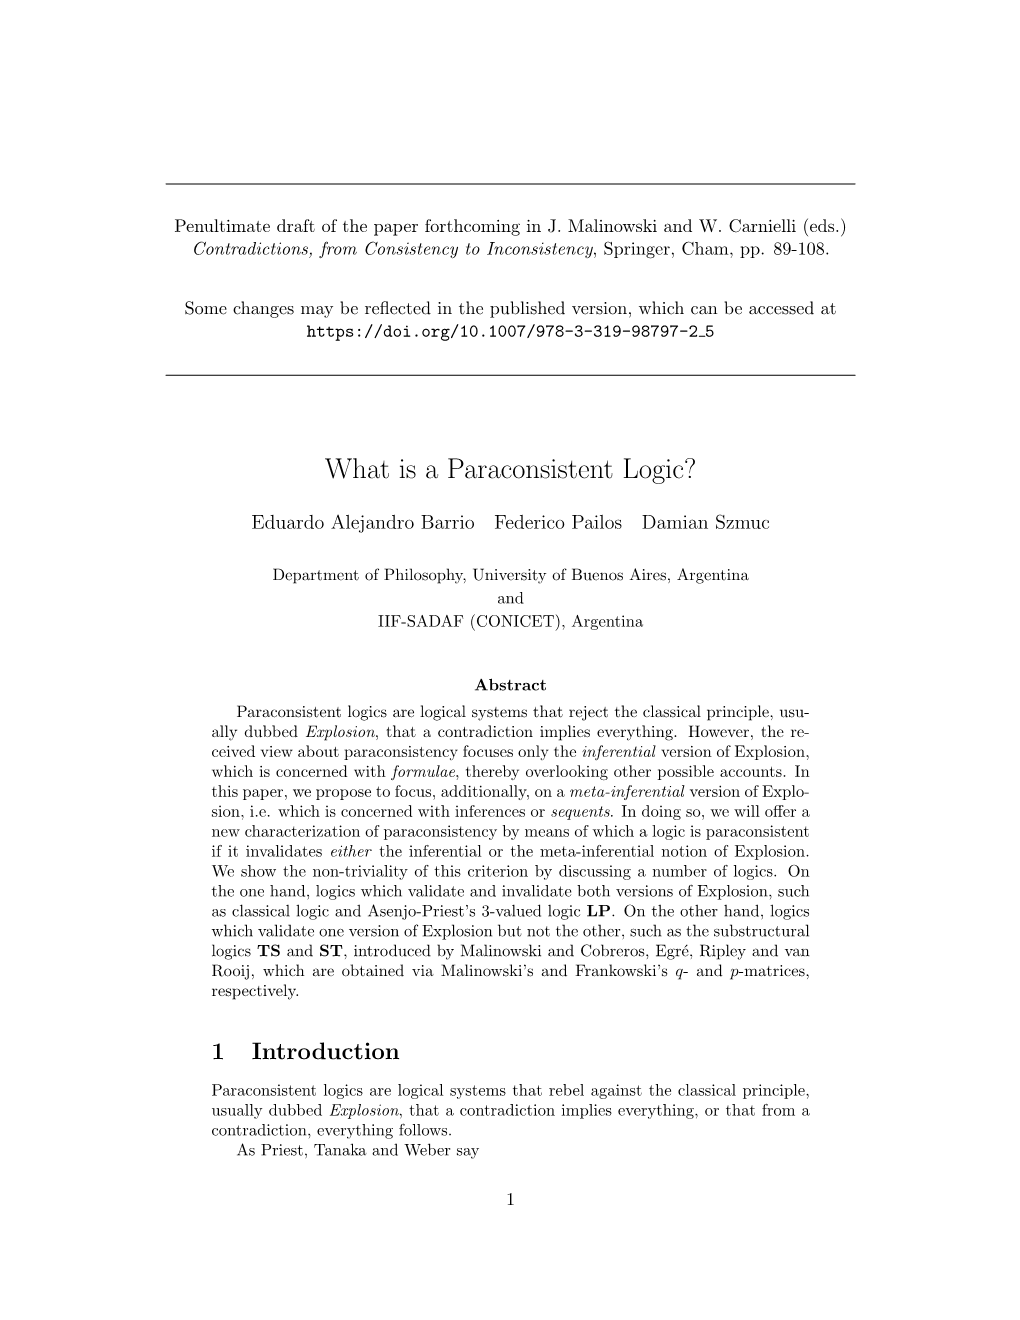 What Is a Paraconsistent Logic?